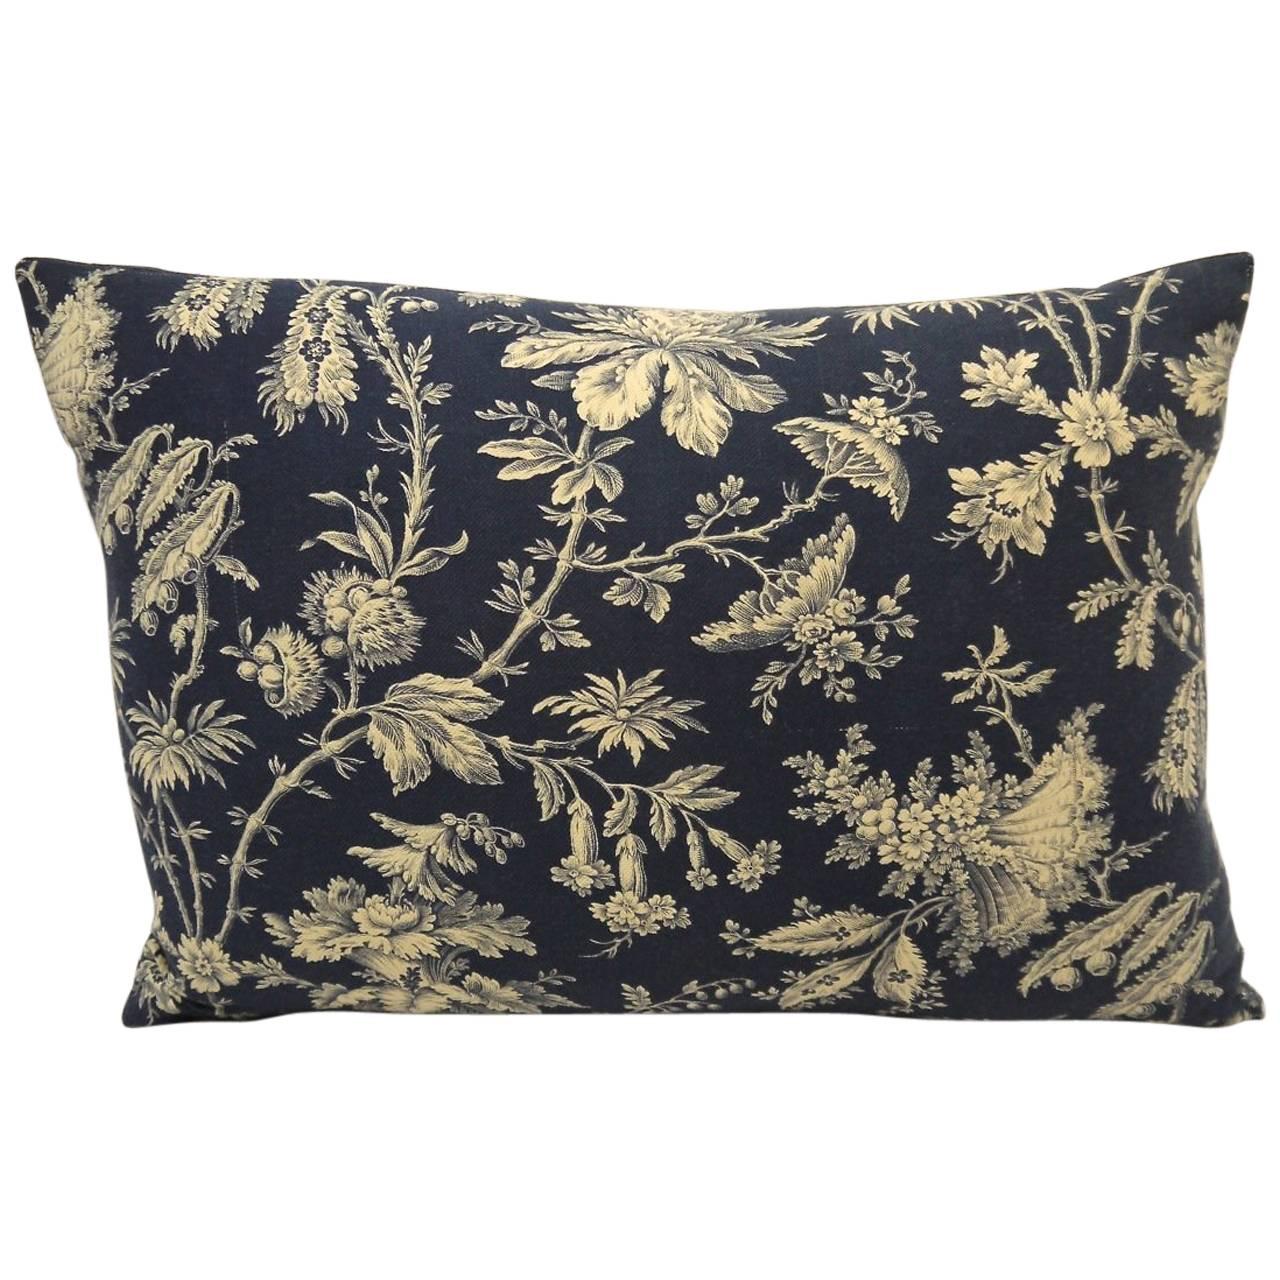 19th Century French Antique Printed Floral Cotton Pillow For Sale